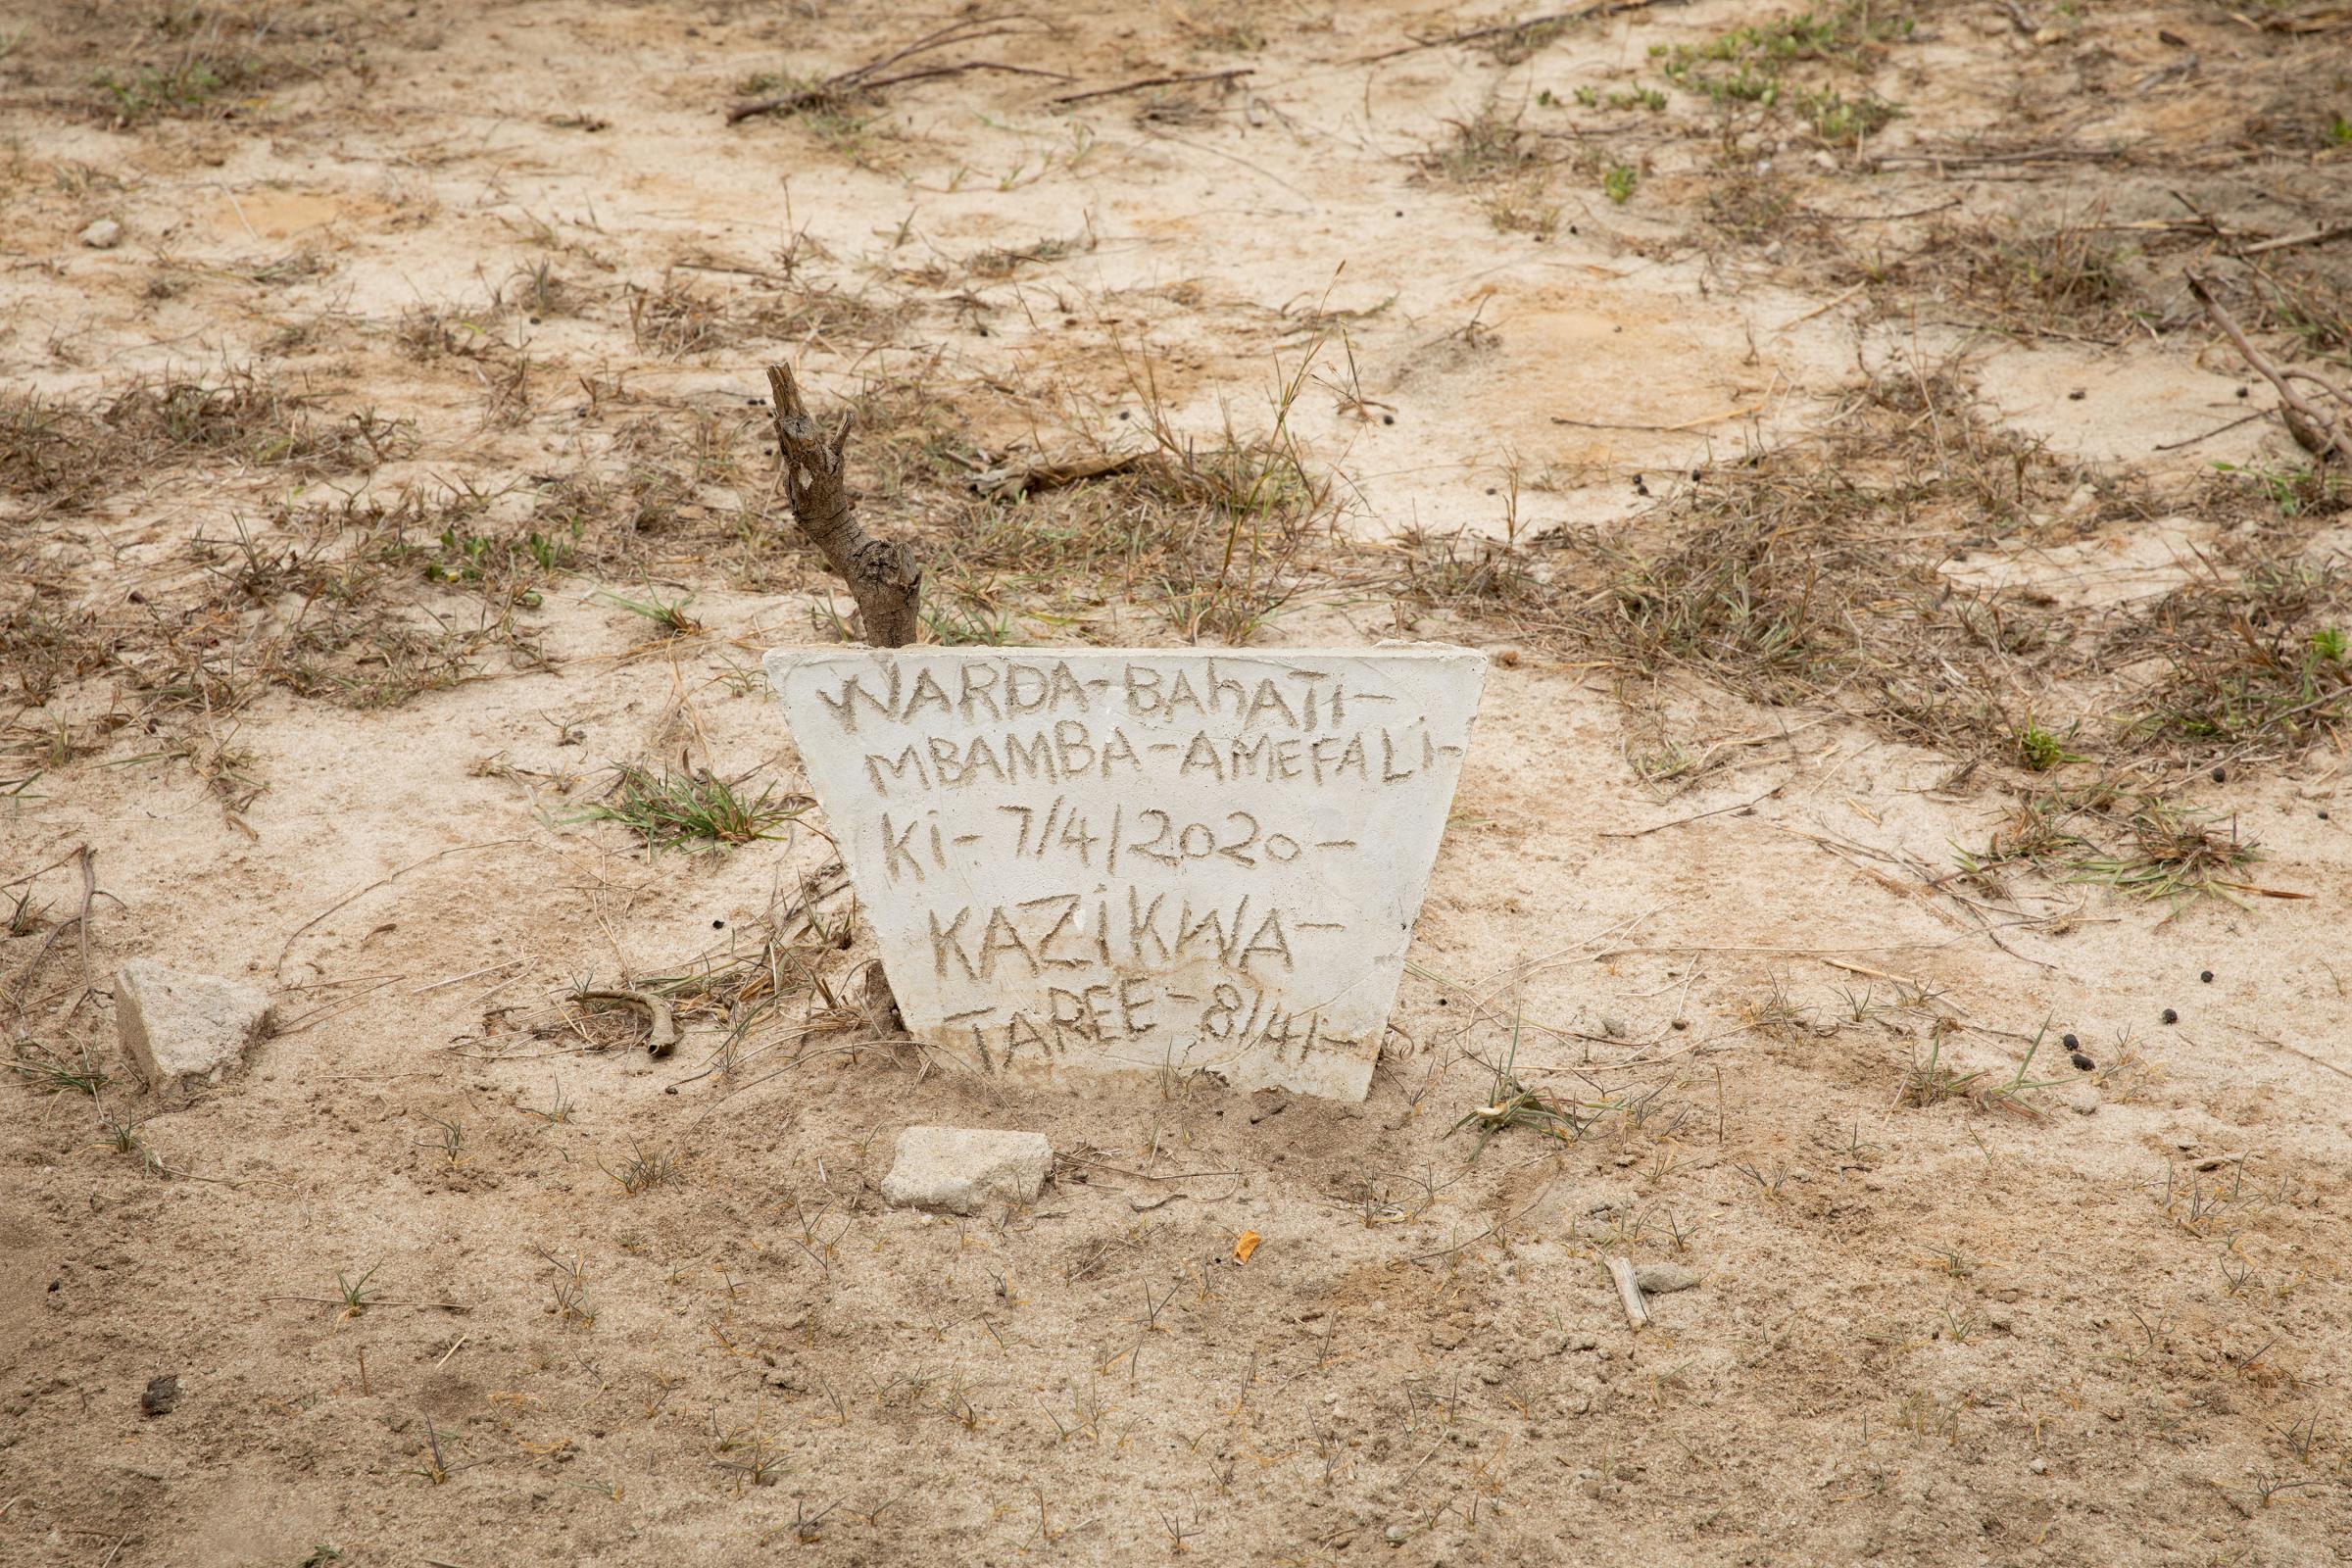 Covid Coverup - Newly dug graves in the Bungu ward of Dar es Salaam, Tanzania on 26 October 2021. Videos of...